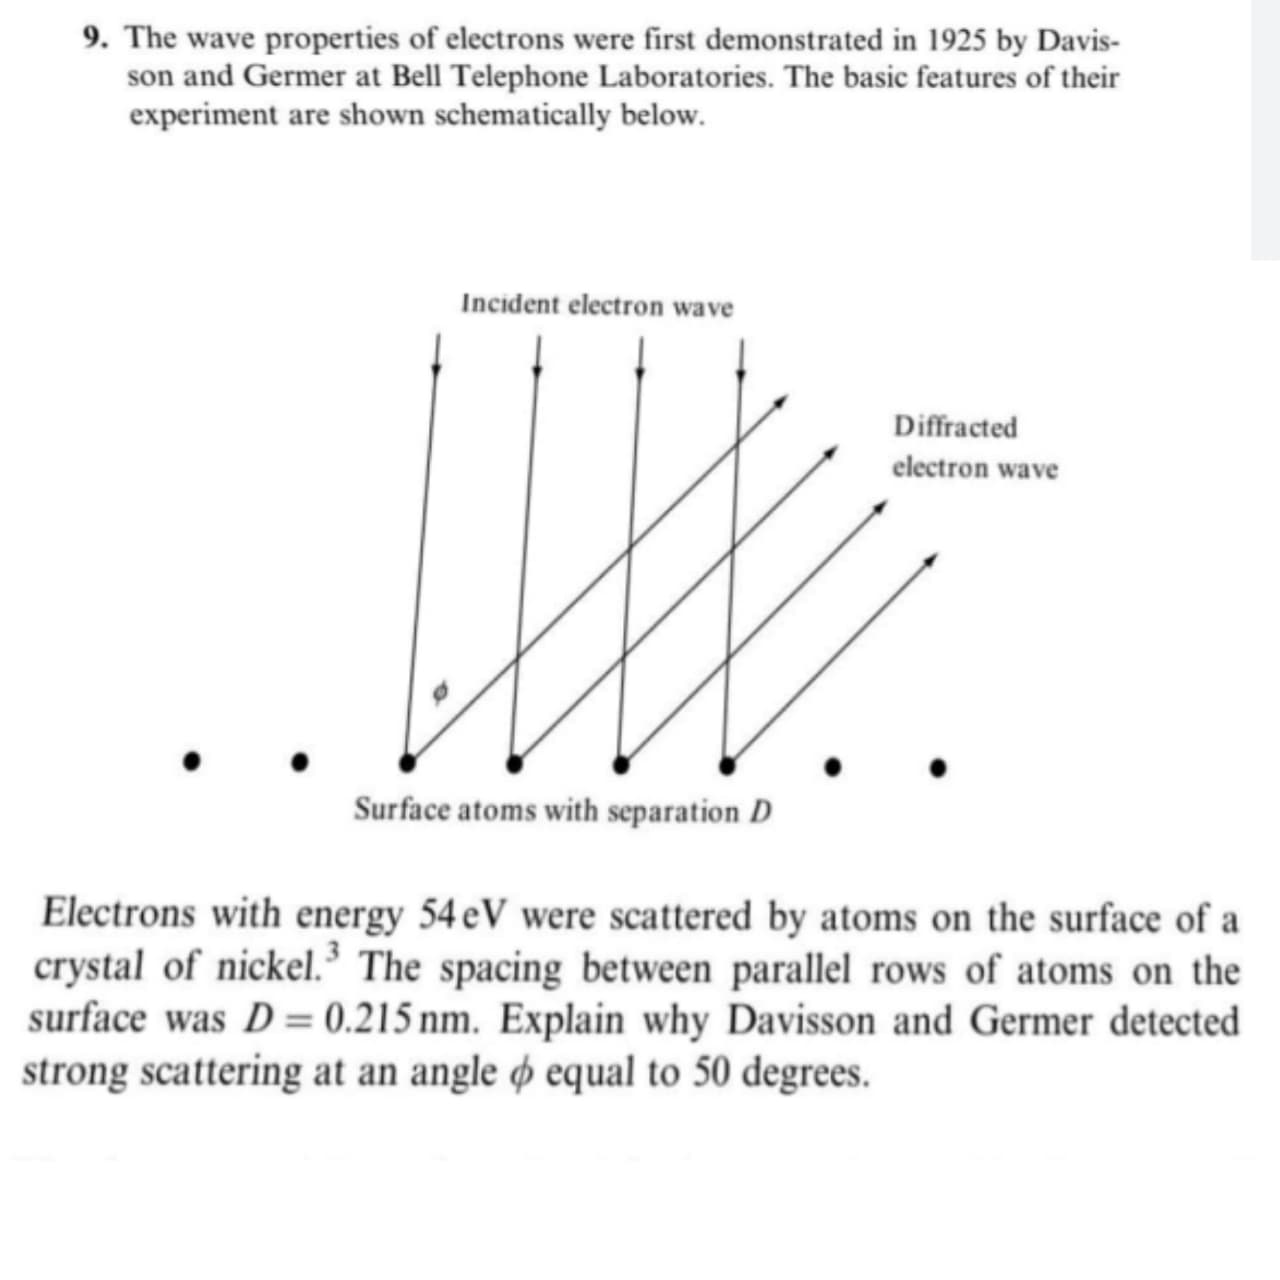 9. The wave properties of electrons were first demonstrated in 1925 by Davis-
son and Germer at Bell Telephone Laboratories. The basic features of their
experiment are shown schematically below.
Incident electron wave
Diffracted
electron wave
Surface atoms with separation D
Electrons with energy 54 eV were scattered by atoms on the surface of a
crystal of nickel.³ The spacing between parallel rows of atoms on the
surface was D = 0.215 nm. Explain why Davisson and Germer detected
strong scattering at an angle o equal to 50 degrees.
